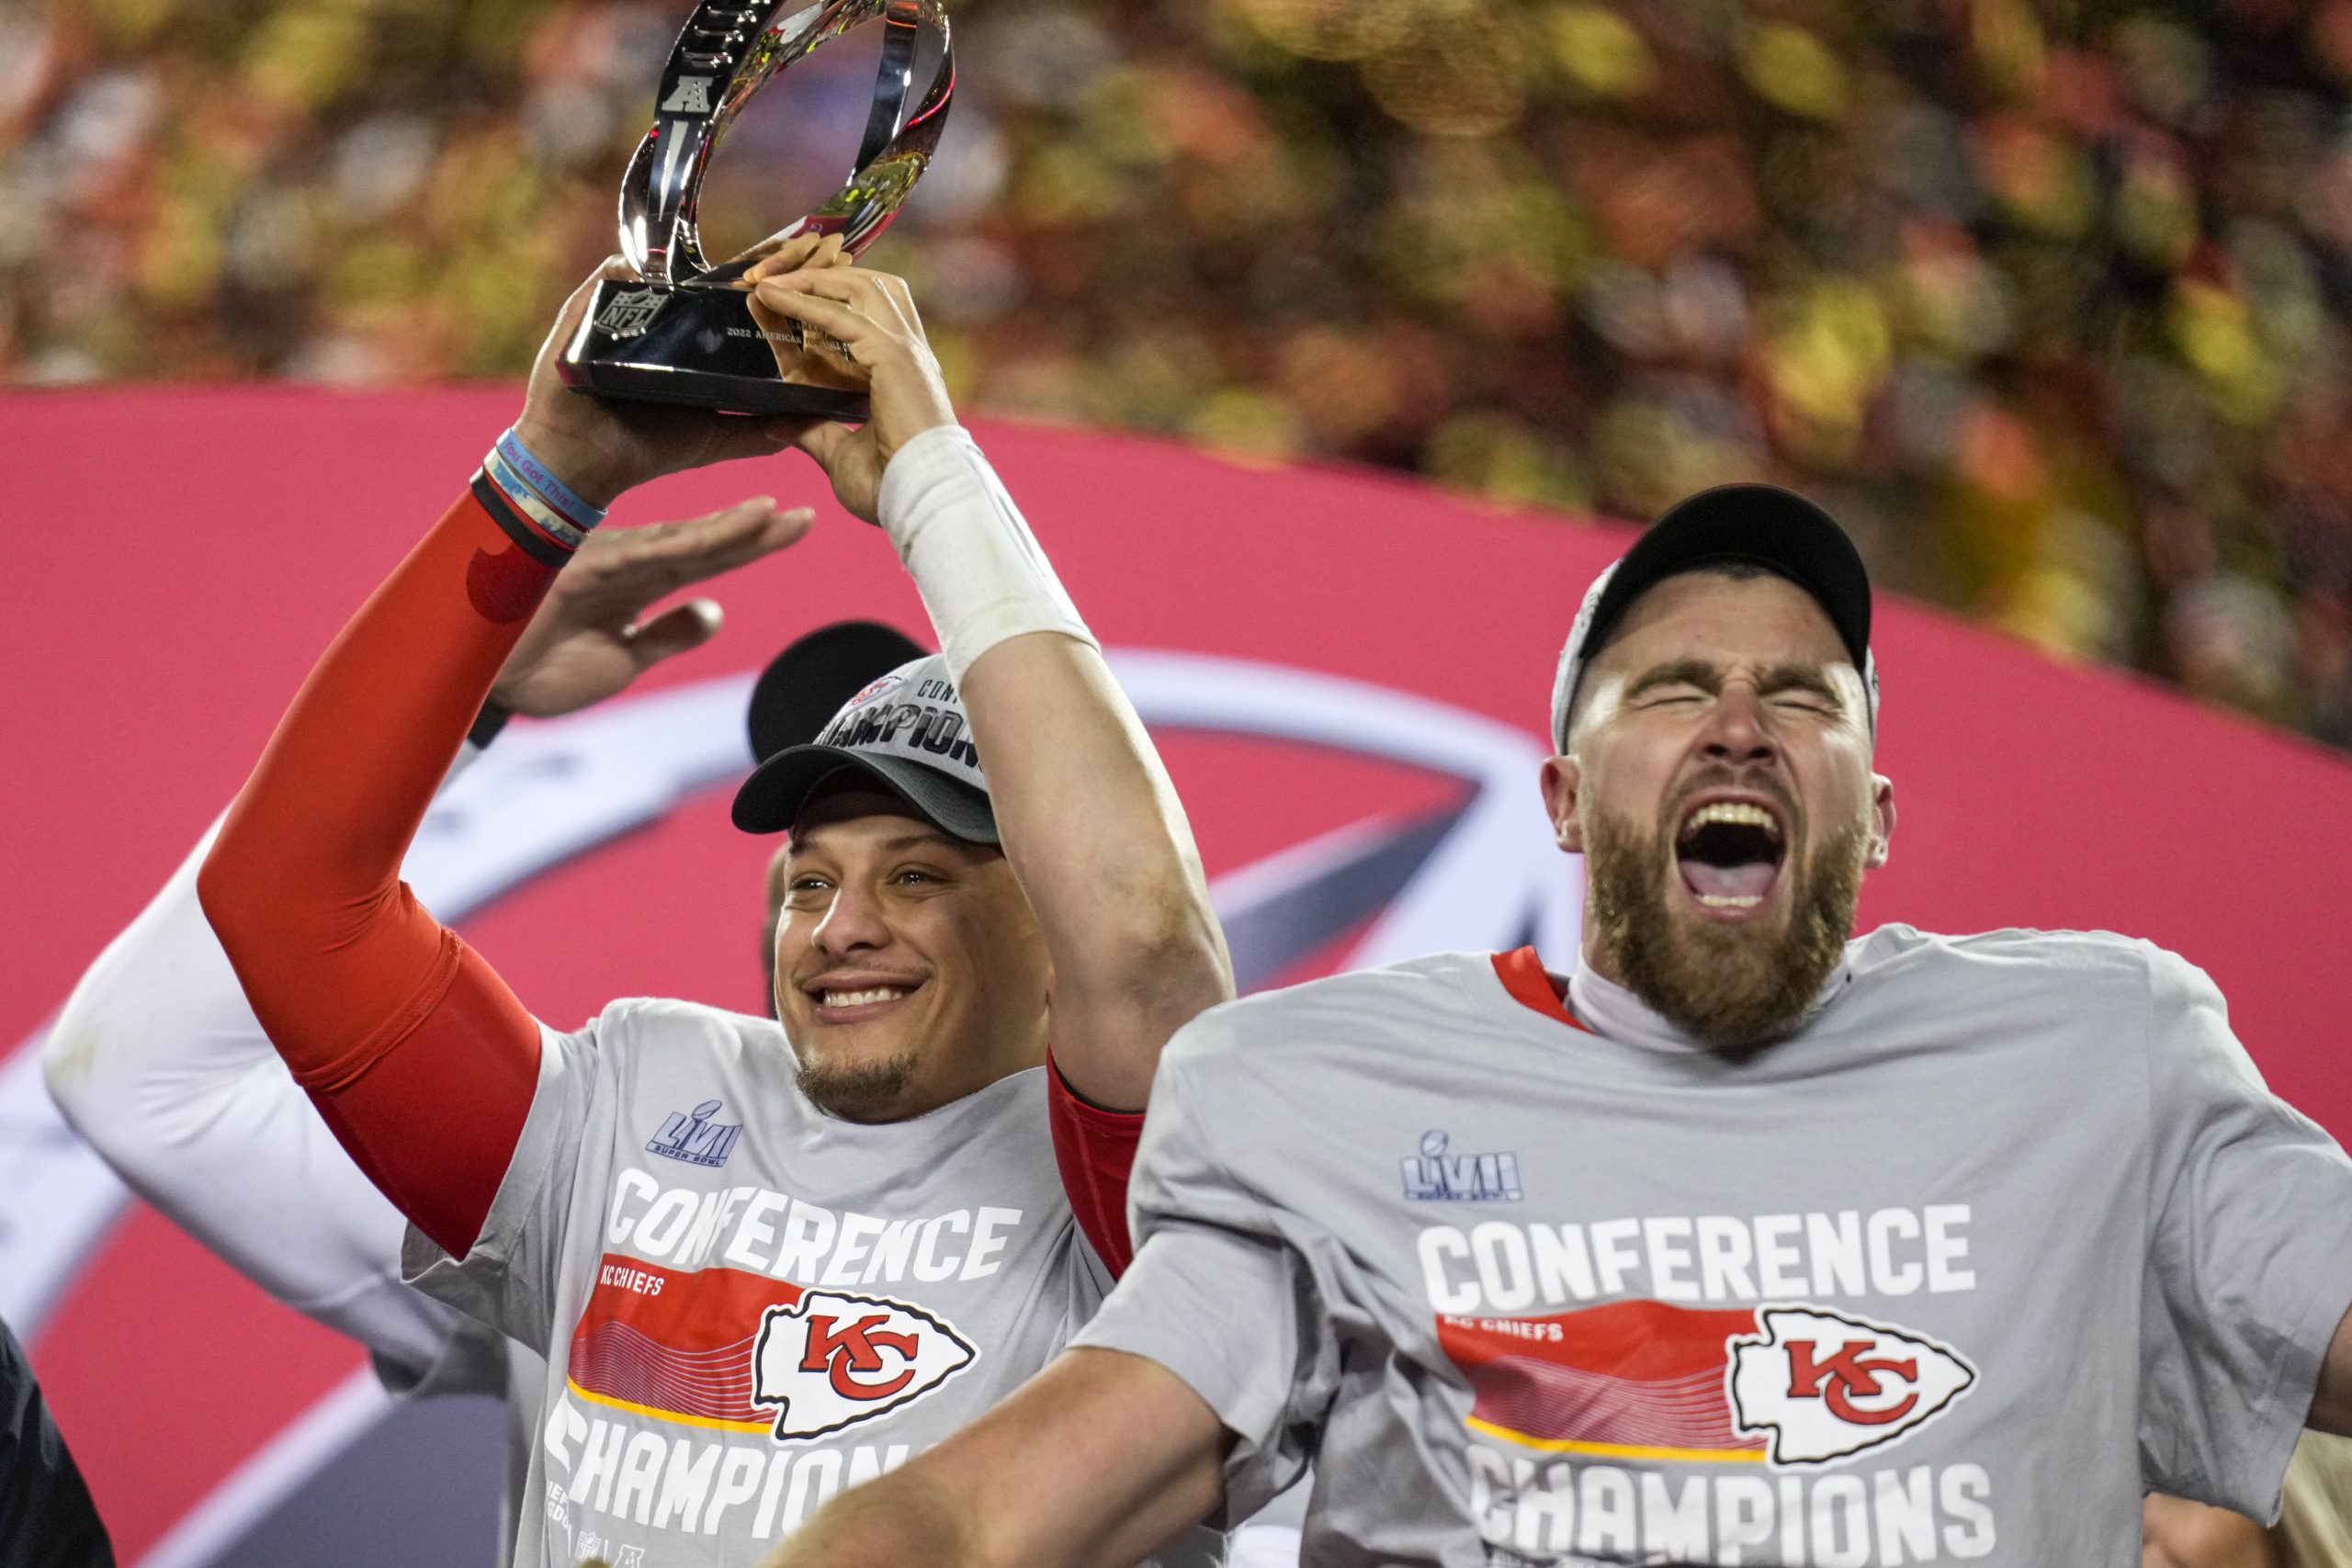 NFL, American Football Herren, USA AFC Championship-Cincinnati Bengals at Kansas City Chiefs Jan 29, 2023 Kansas City, Missouri, USA Kansas City Chiefs quarterback Patrick Mahomes 15 raises the Lamar Hunt Trophy with tight end Travis Kelce 87 after the AFC championship NFL game between the Cincinnati Bengals and the Kansas City Chiefs, Sunday, Jan. 29, 2023, at Arrowhead Stadium in Kansas City, Mo. The Kansas City Chiefs advanced to the Super Bowl with a 23-20 win over the Bengals. Kansas City GEHA Field at Arrowhead Stadium Missouri USA, EDITORIAL USE ONLY PUBLICATIONxINxGERxSUIxAUTxONLY Copyright: xSamxGreenex 20230129_lbm_usa_394